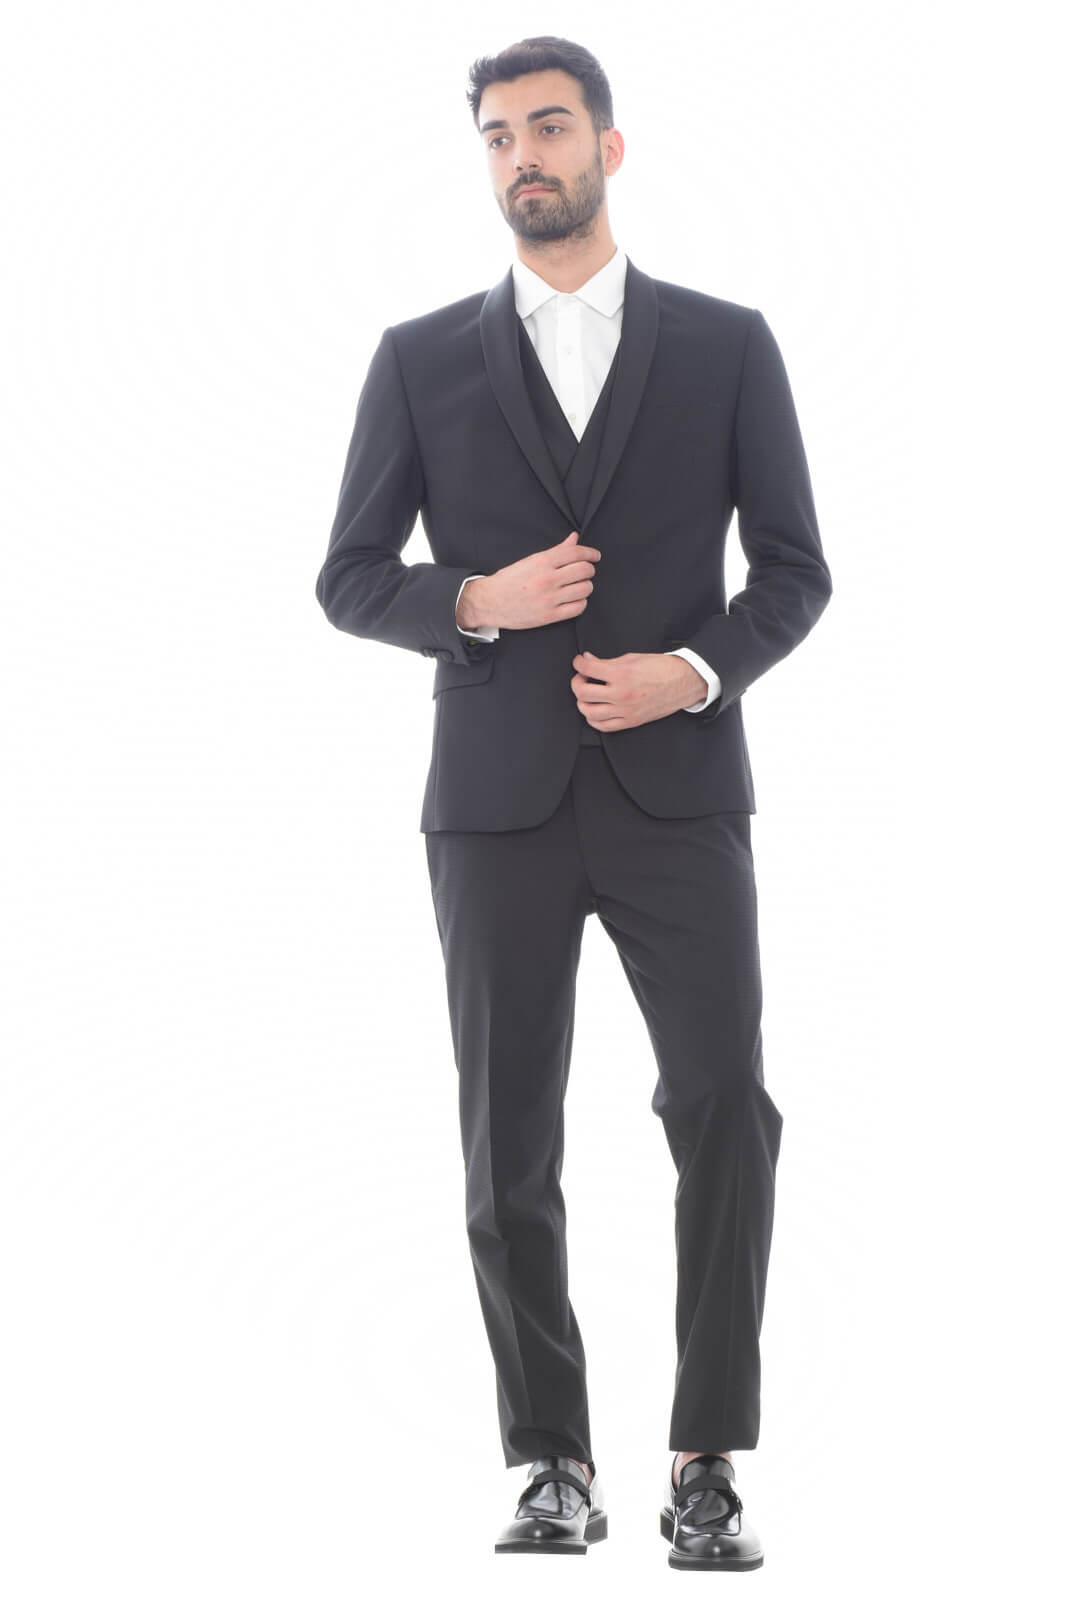 Angelo Toma Men's suit with lapel collar